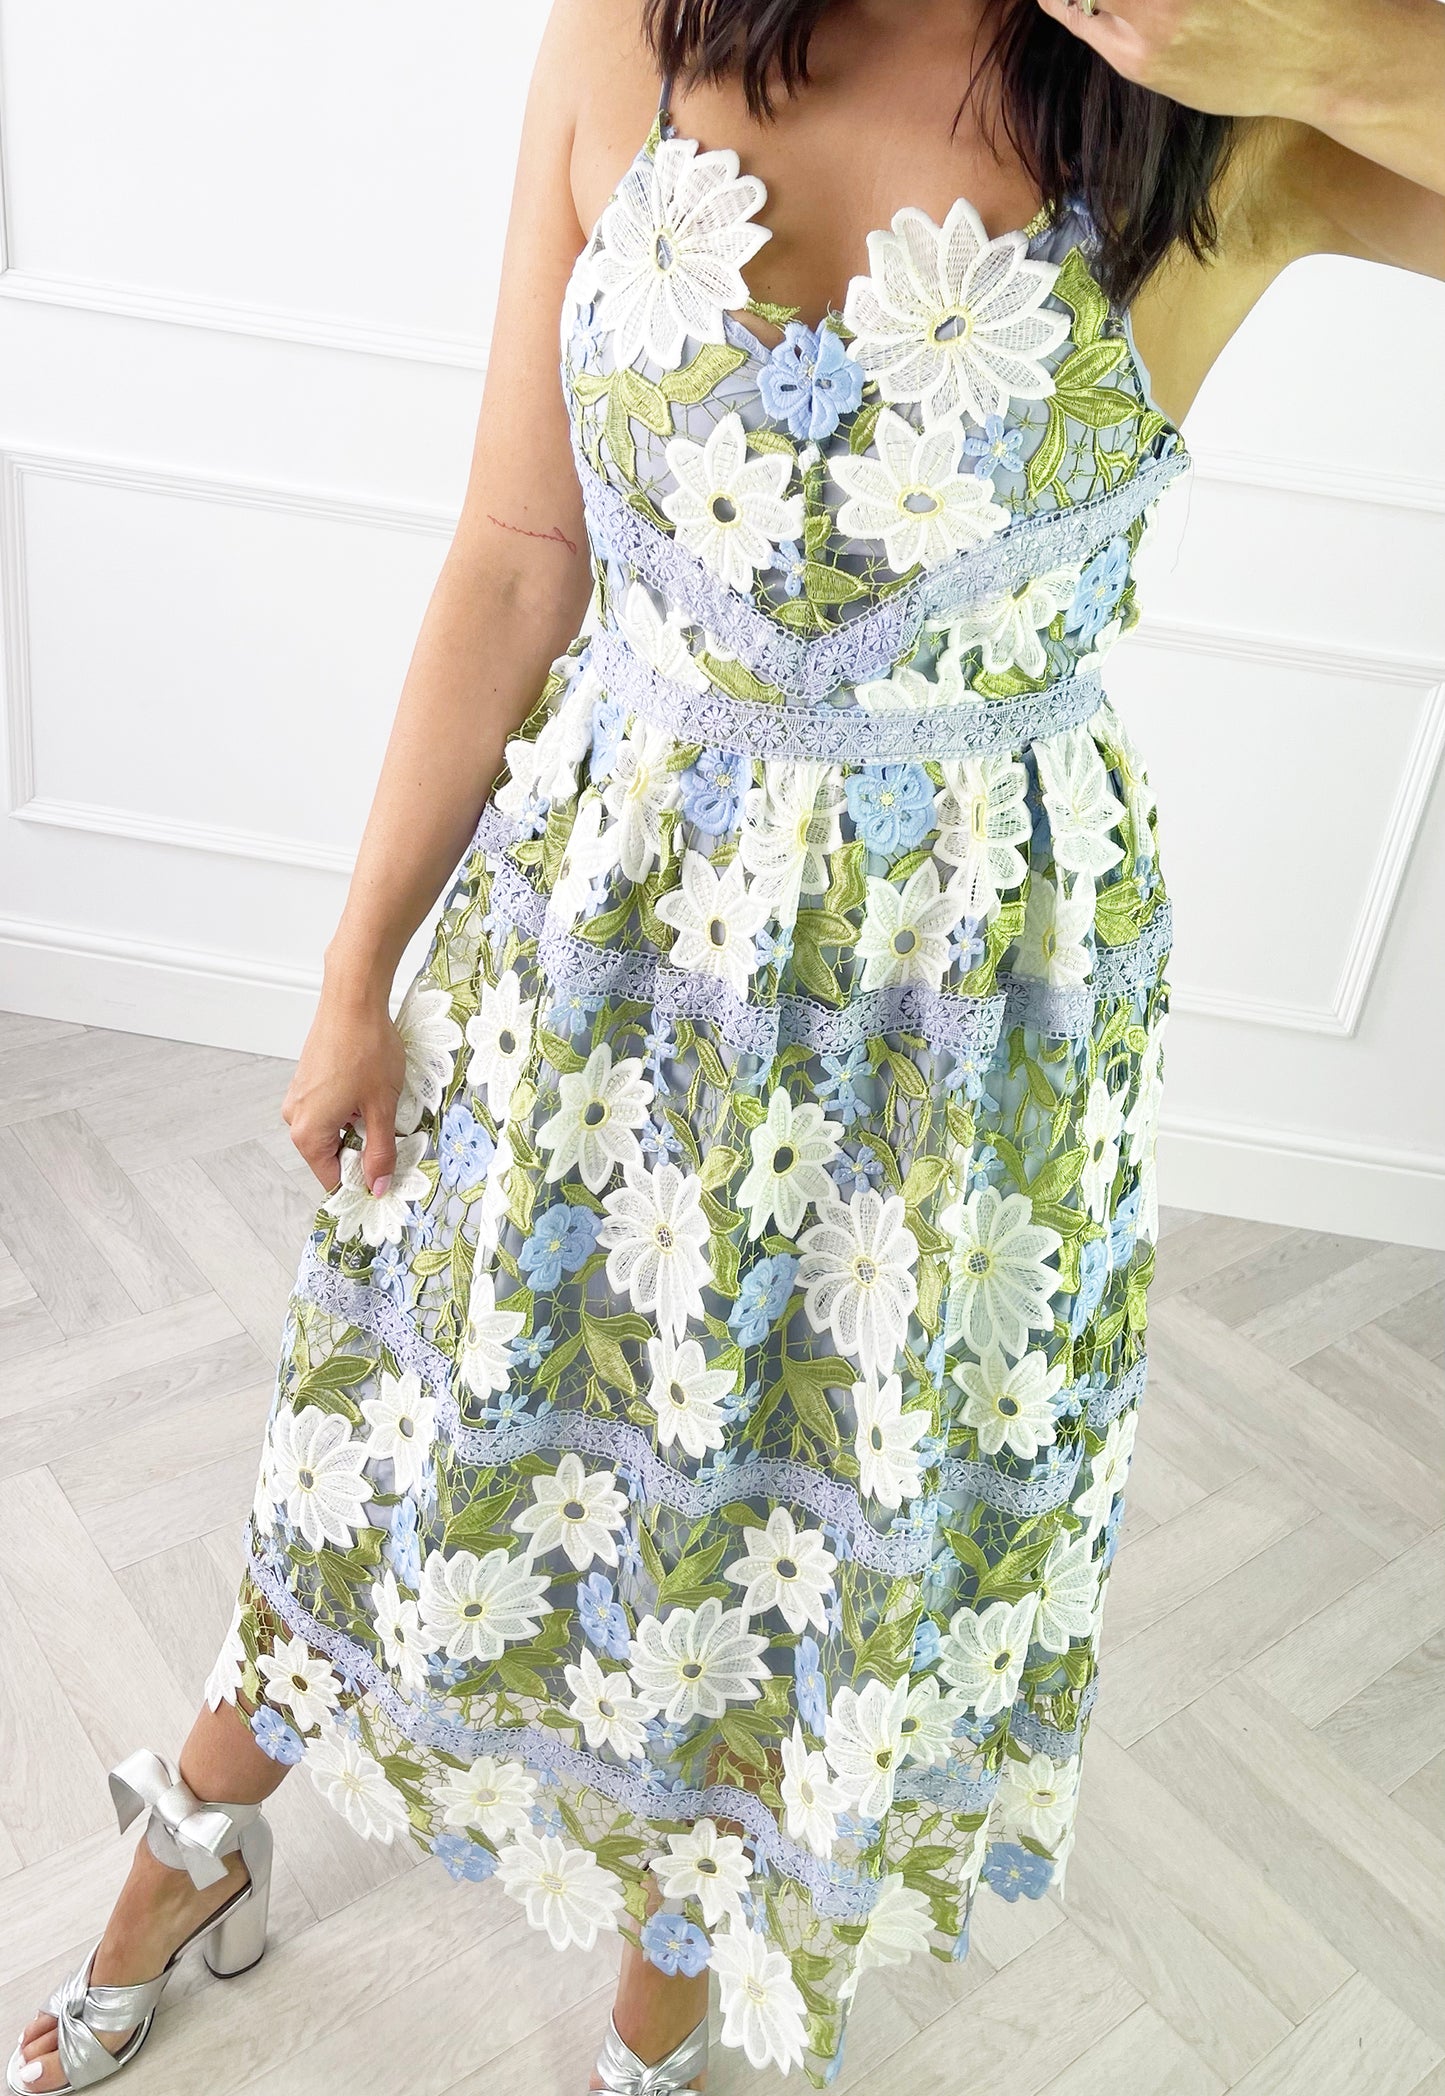 YAS Sun Strappy Floral Lace Appliqué Midi Dress in Blue, White & Green - One Nation Clothing